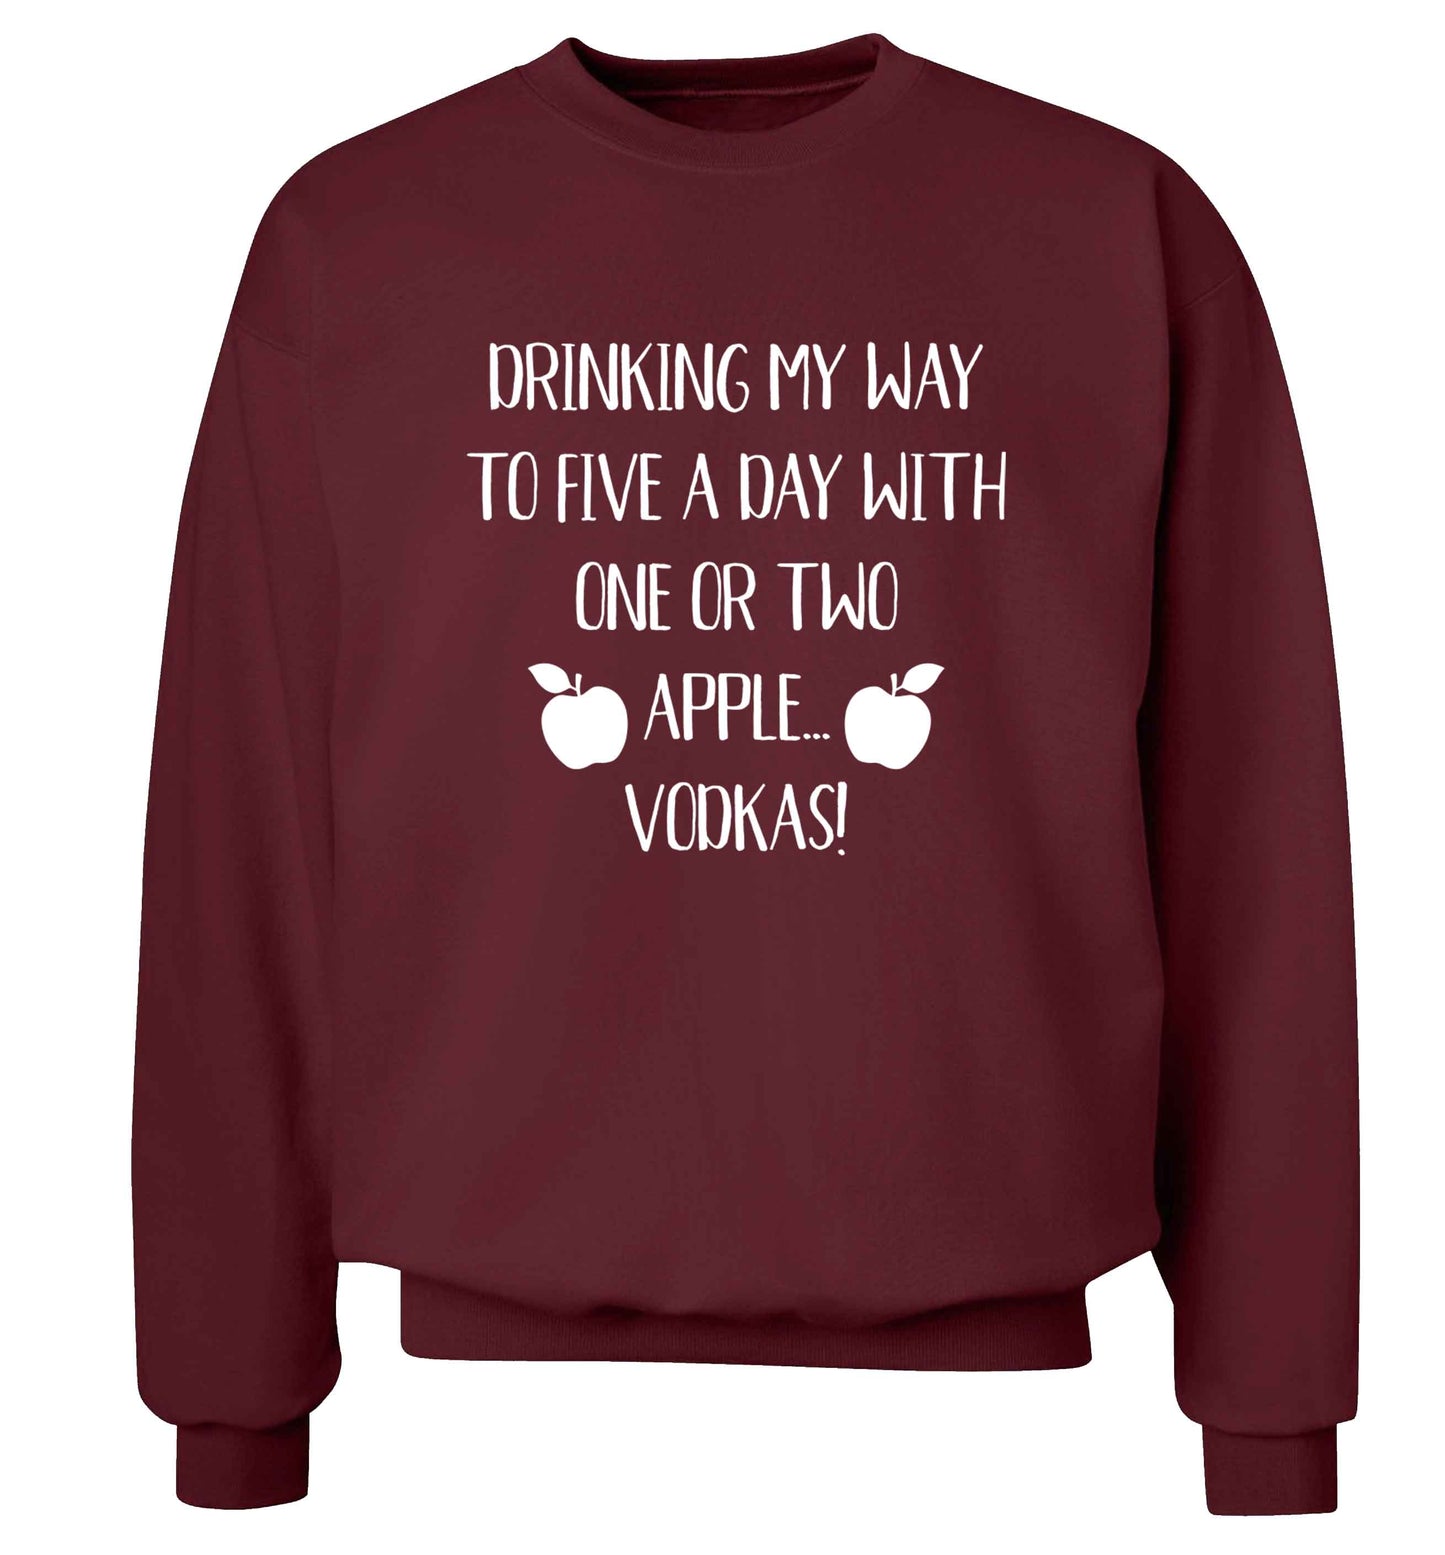 Drinking my way to five a day with one or two apple vodkas Adult's unisex maroon Sweater 2XL